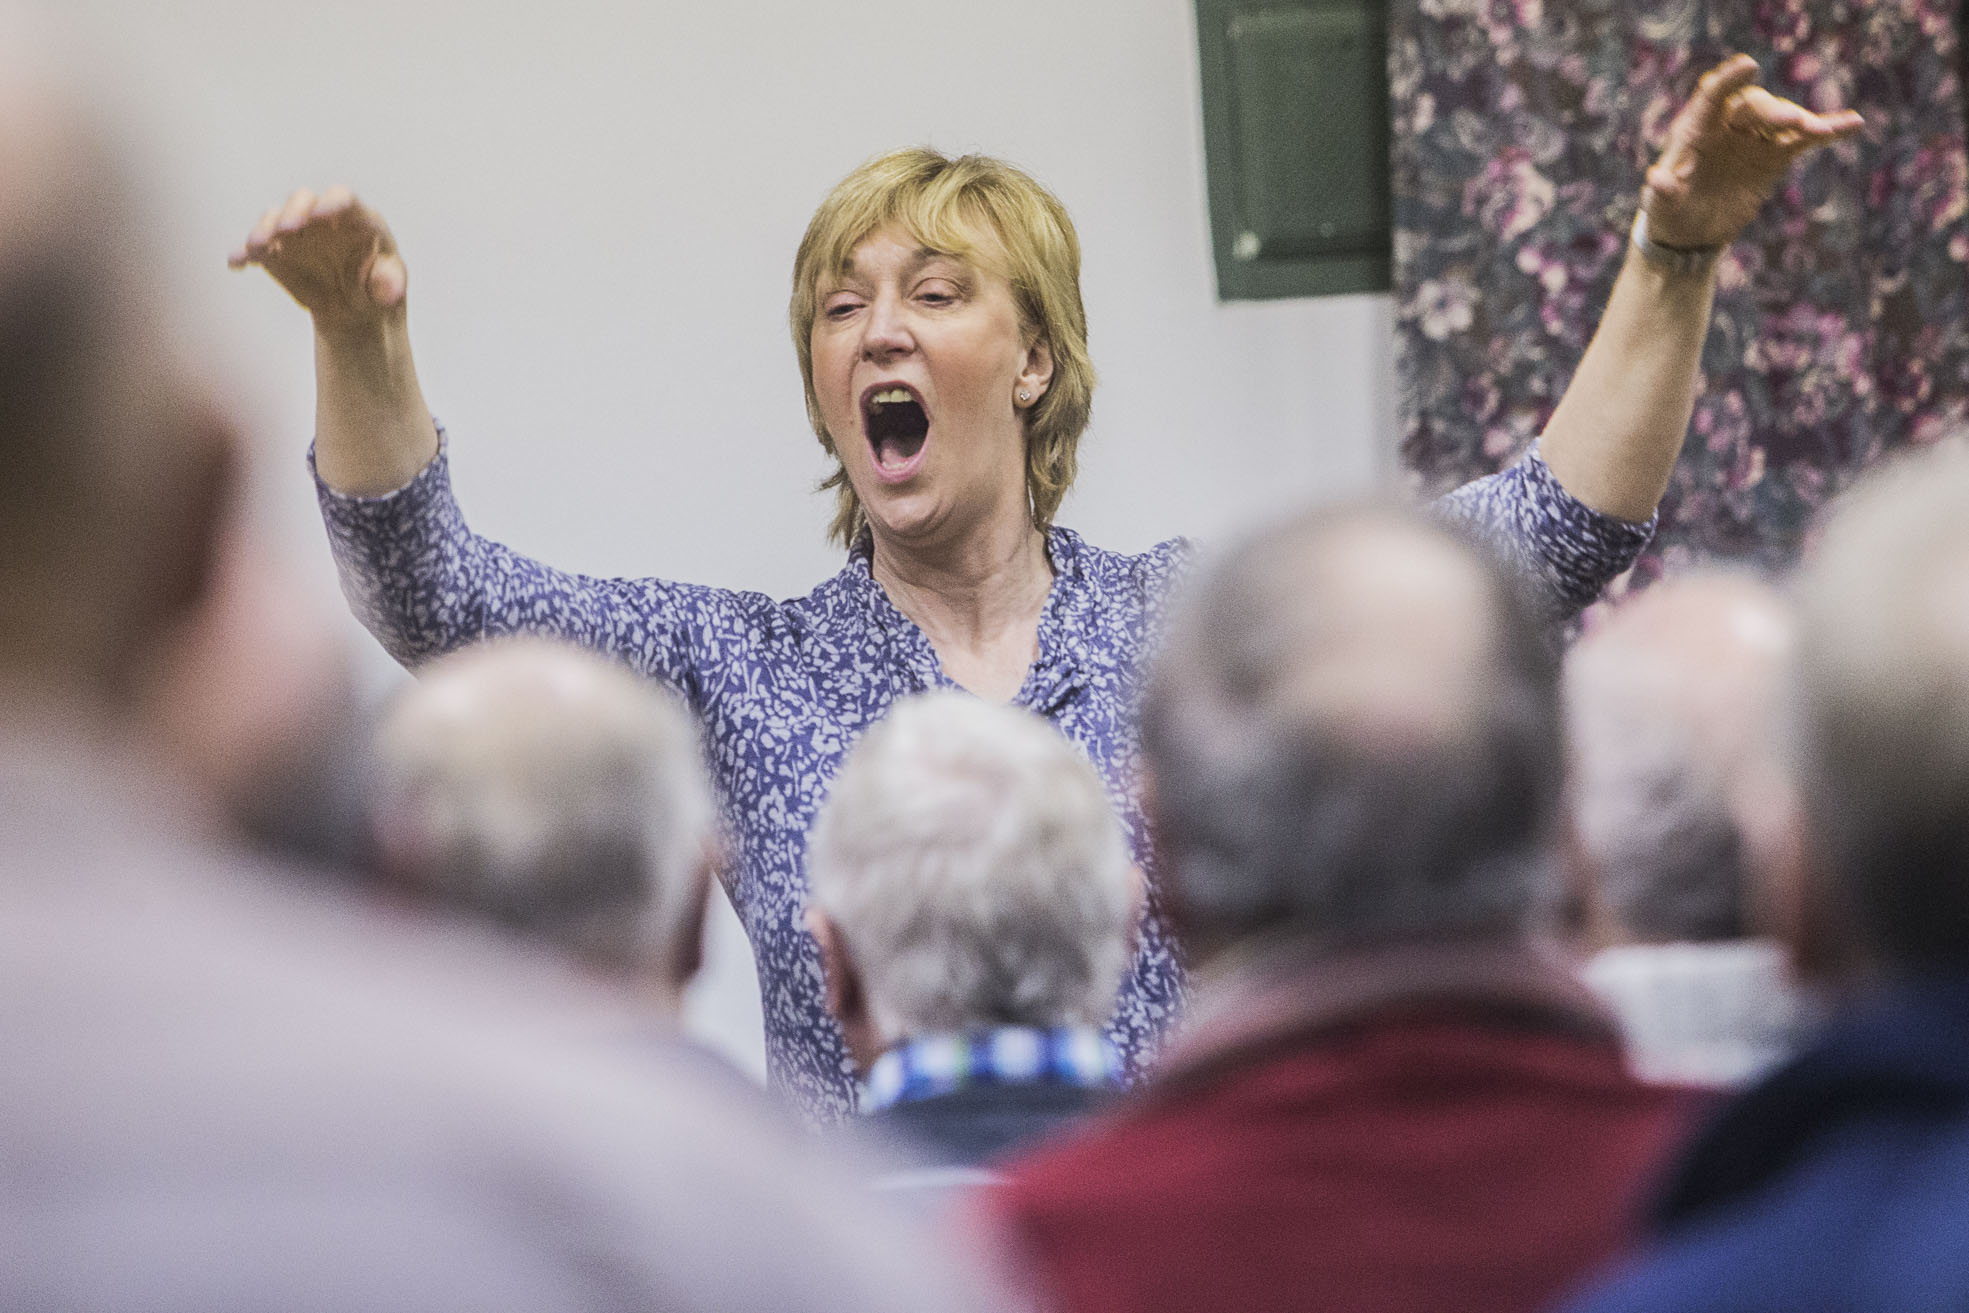 Search is on for community choristers to sing with opera stars at iconic music festival